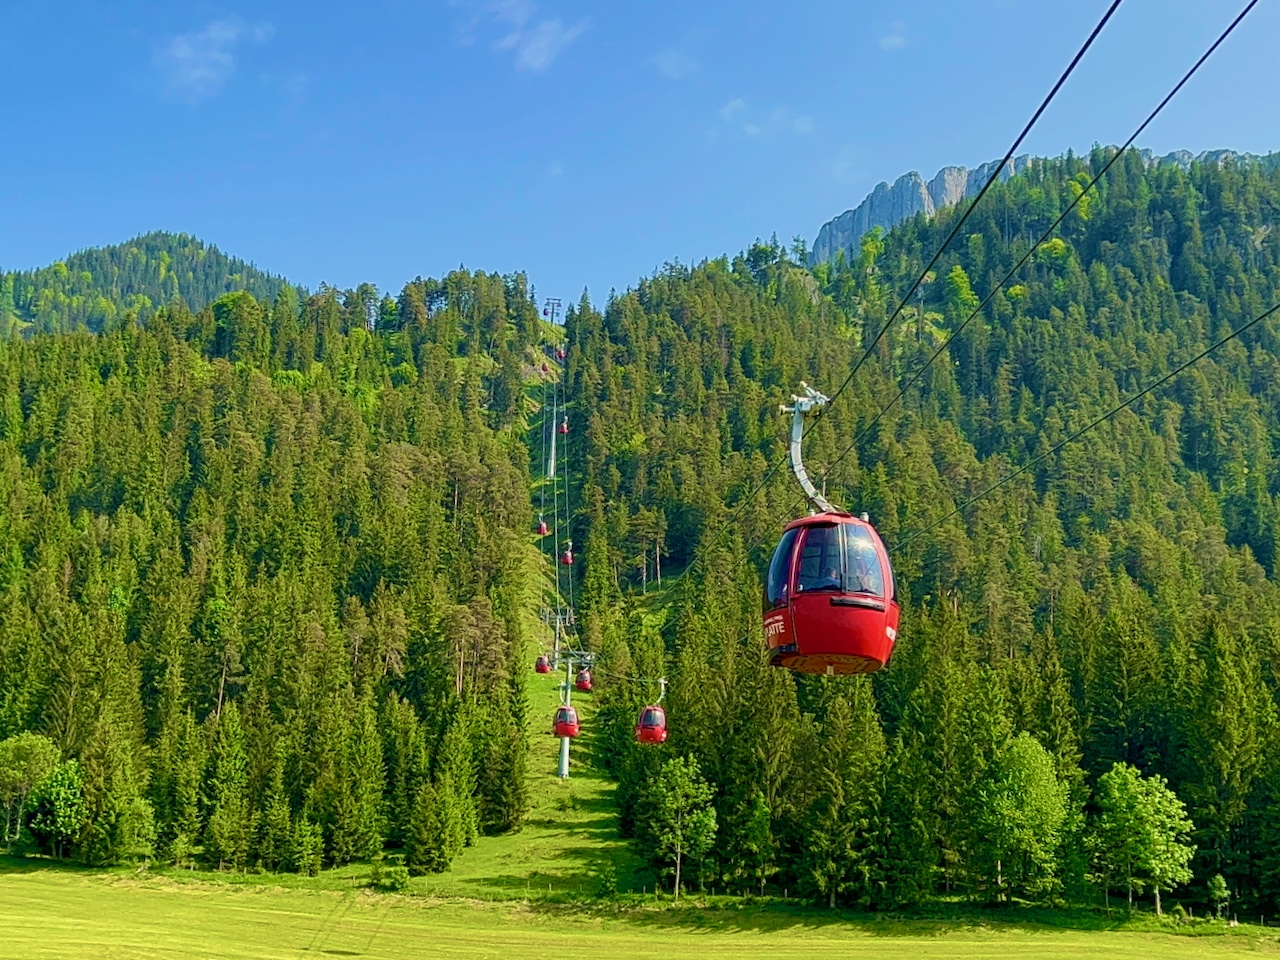 The mountain railway from Waidring to Steinplatte takes you from Waidring to the 1869 meter high Steinplatte, which lies on the border between Tyrol, Salzburg and Bavaria. Travel Report Fieberbrunn Pillerseetal experiences tips sights activities